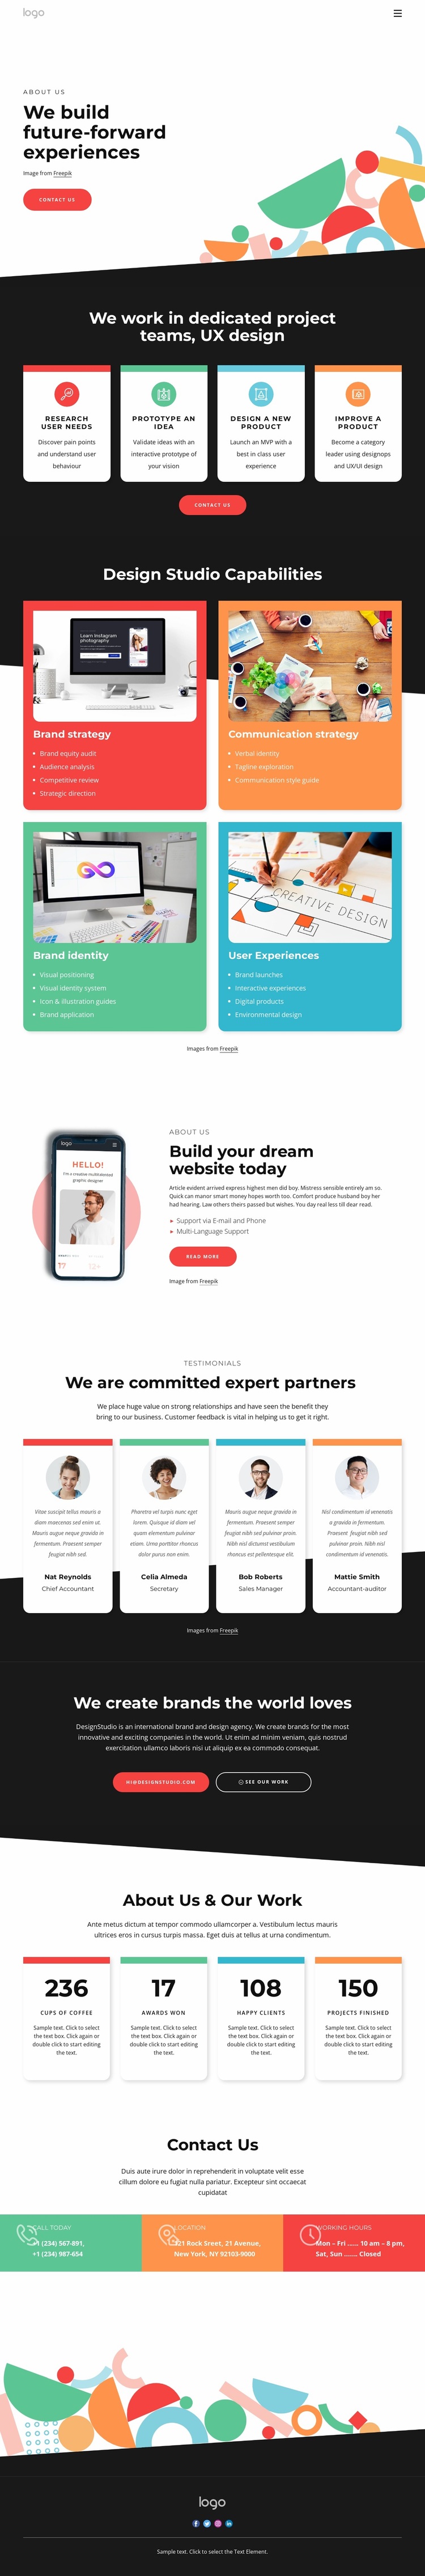 We design with the future in mind Website Design